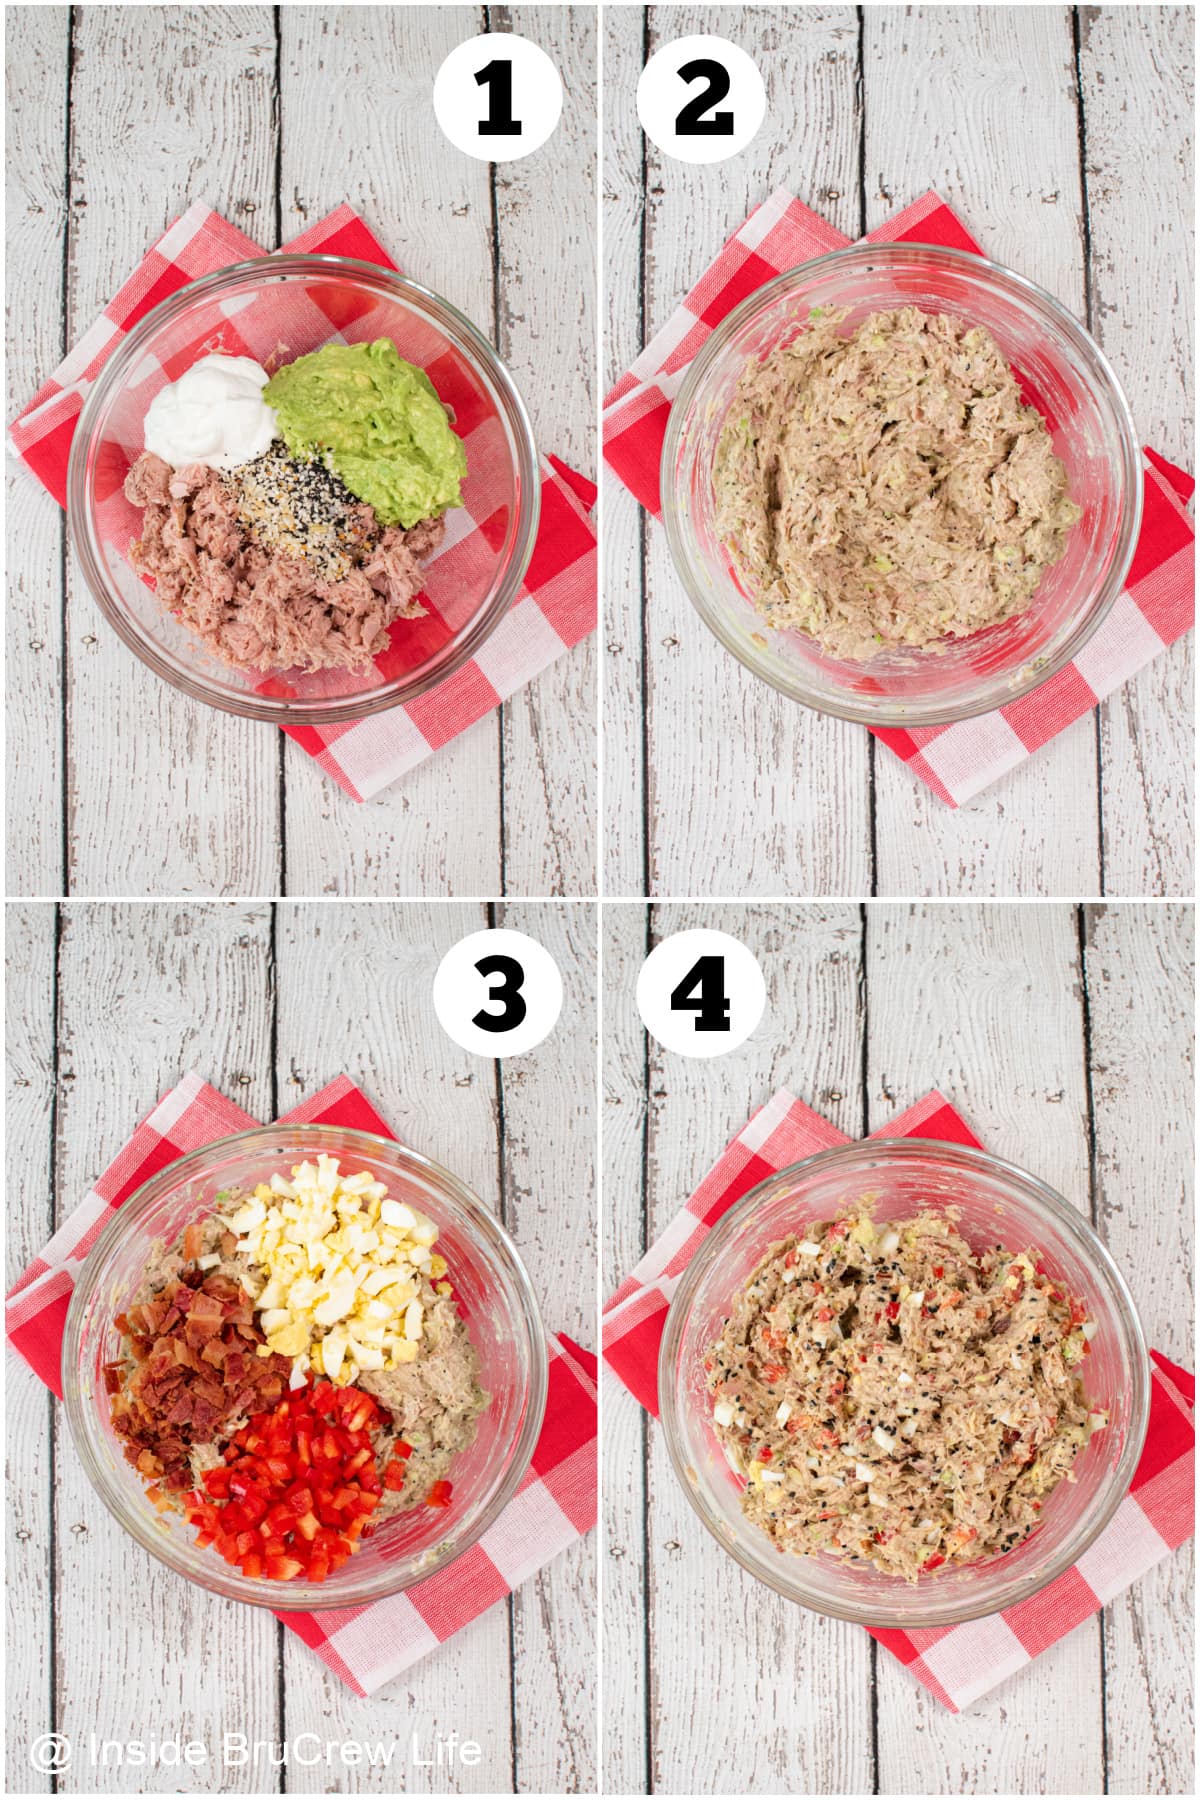 Four pictures collaged together showing how to make tuna salad with avocados.